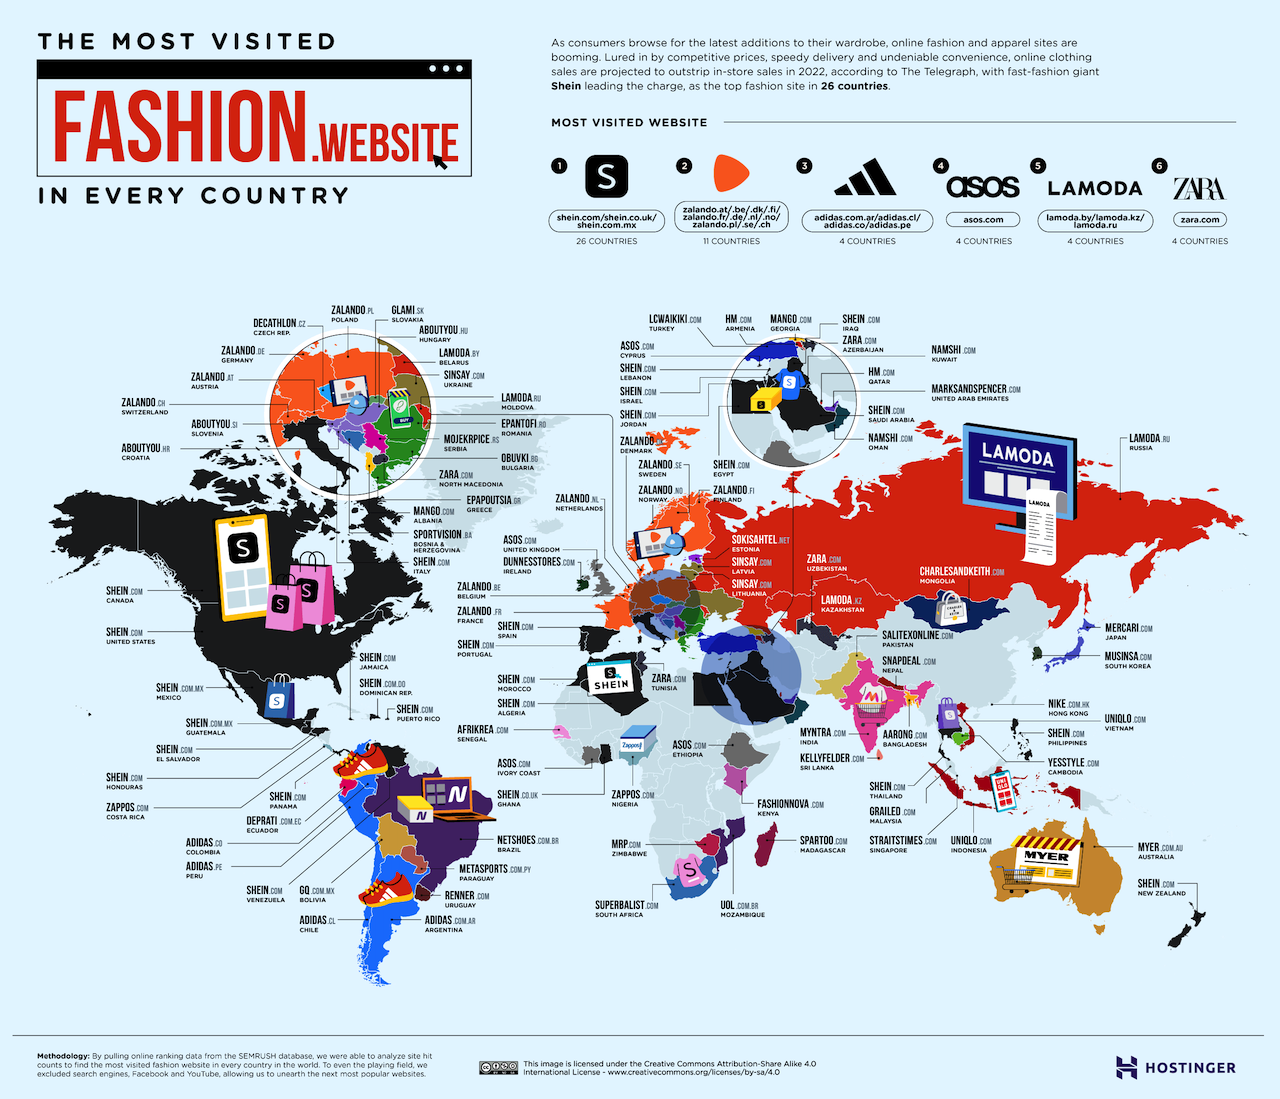 The Most Visited Website in Every Country (That Isn’t A Search Engine)